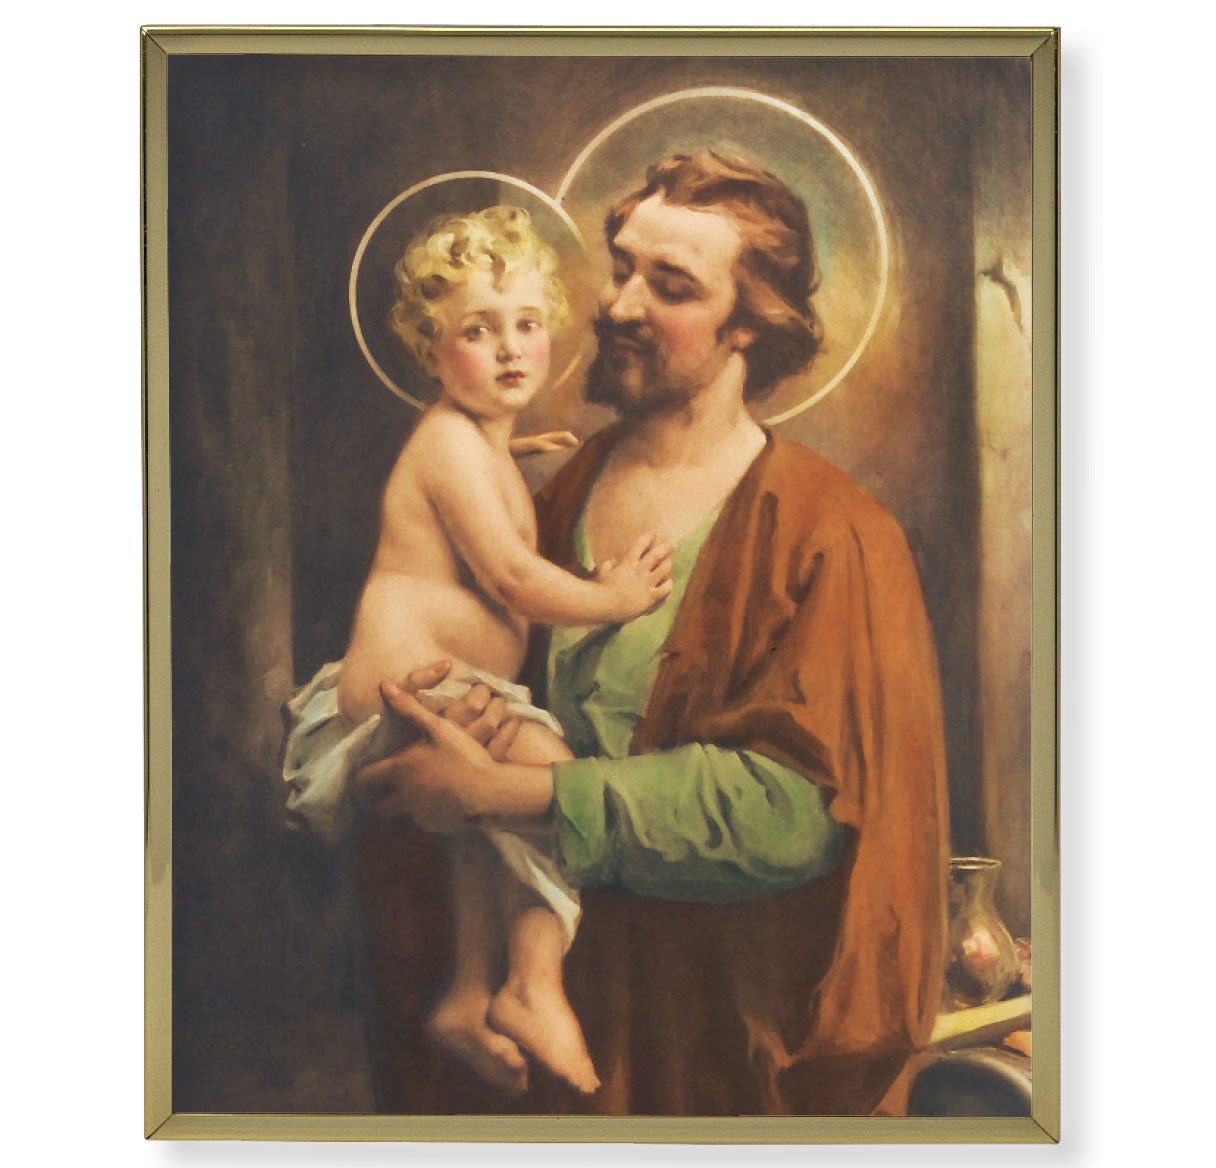 St. Joseph with Jesus Picture Framed Plaque Wall Art Decor Medium, Bright Gold Finished Trimmed Plaque